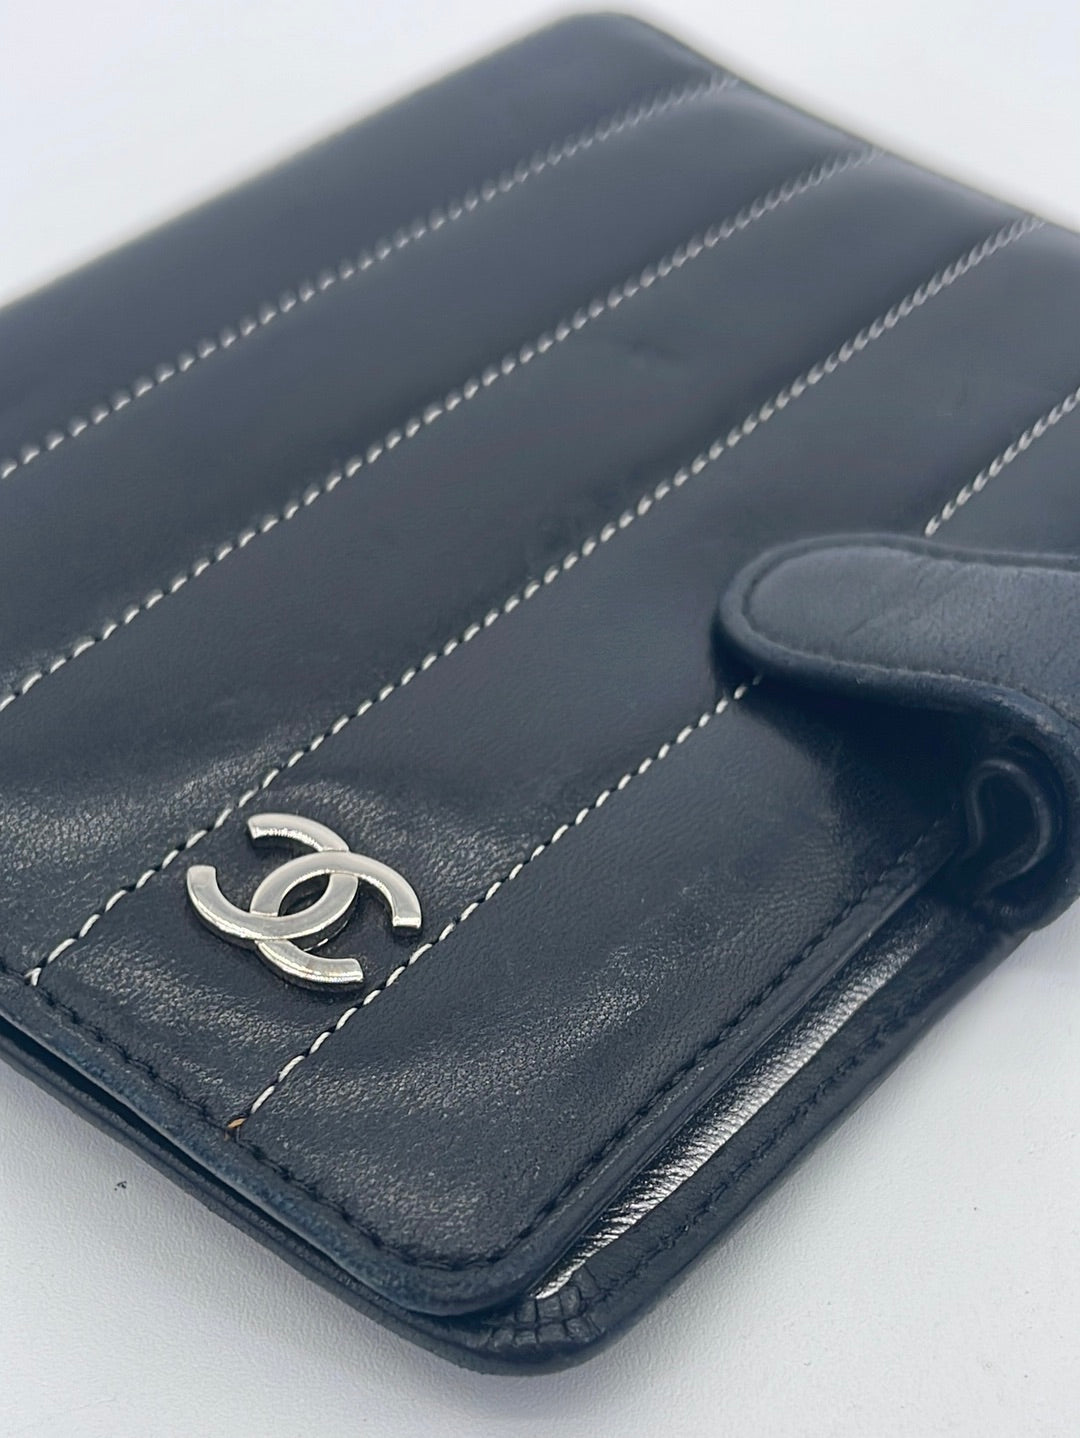 Preloved CHANEL Black Leather Agenda Notebook Cover 10399342 052223 - 125  OFF LIVE SHOW